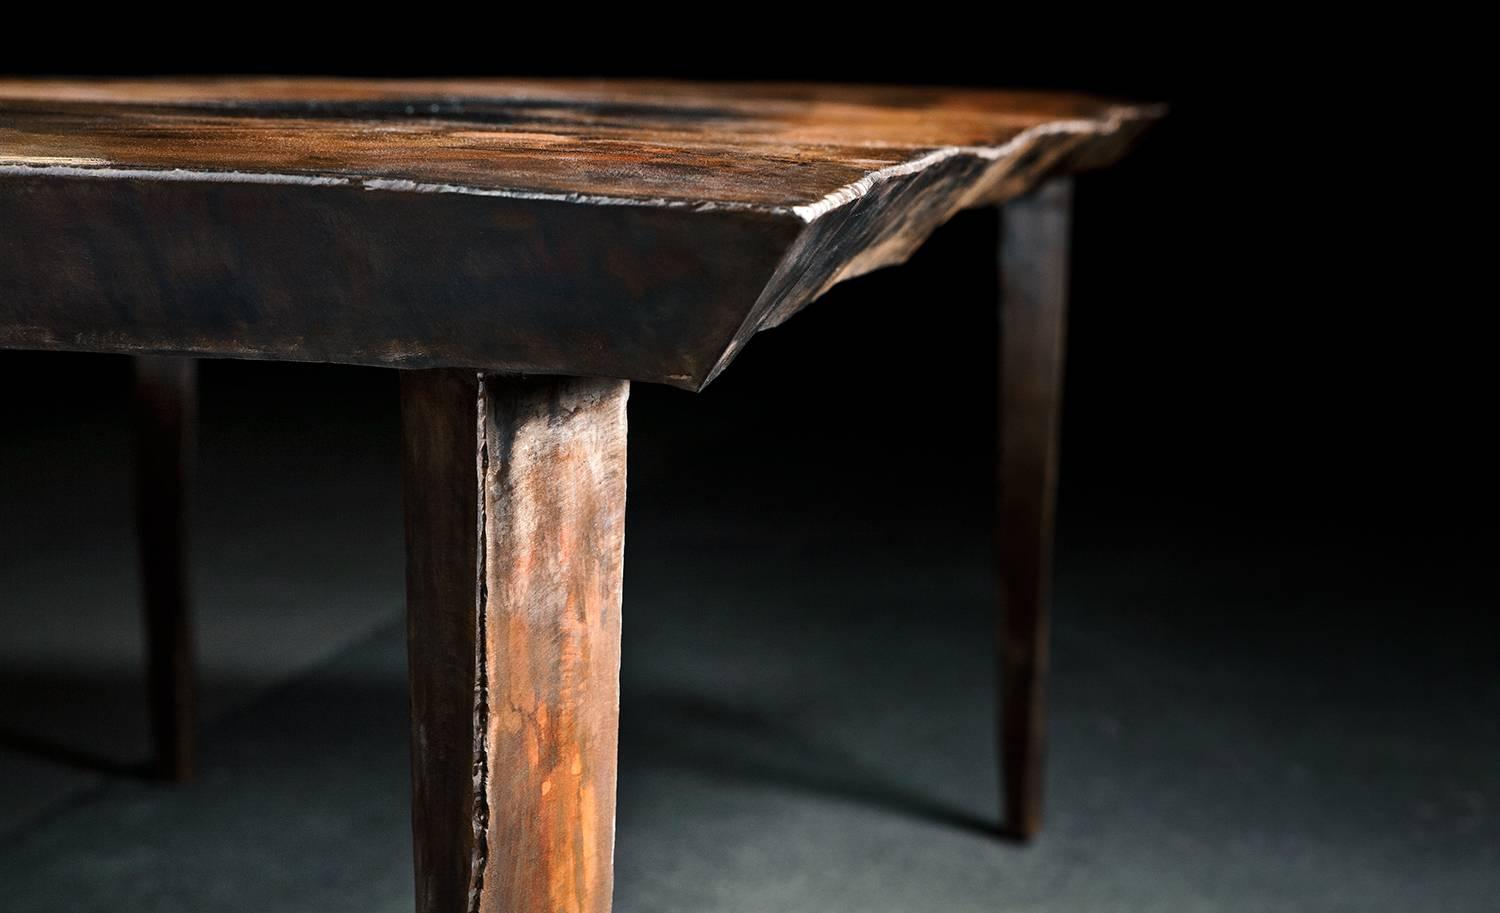 Michael Gittings Studio.
Stainless table
Patinated stainless steel.
Dimensions: 220 cm x 75 cm x 100 cm
Limited Edition of 10.

Michael Gittings
Melbourne based designer Michael Gittings aims to
challenge pre-conceptions around furniture,